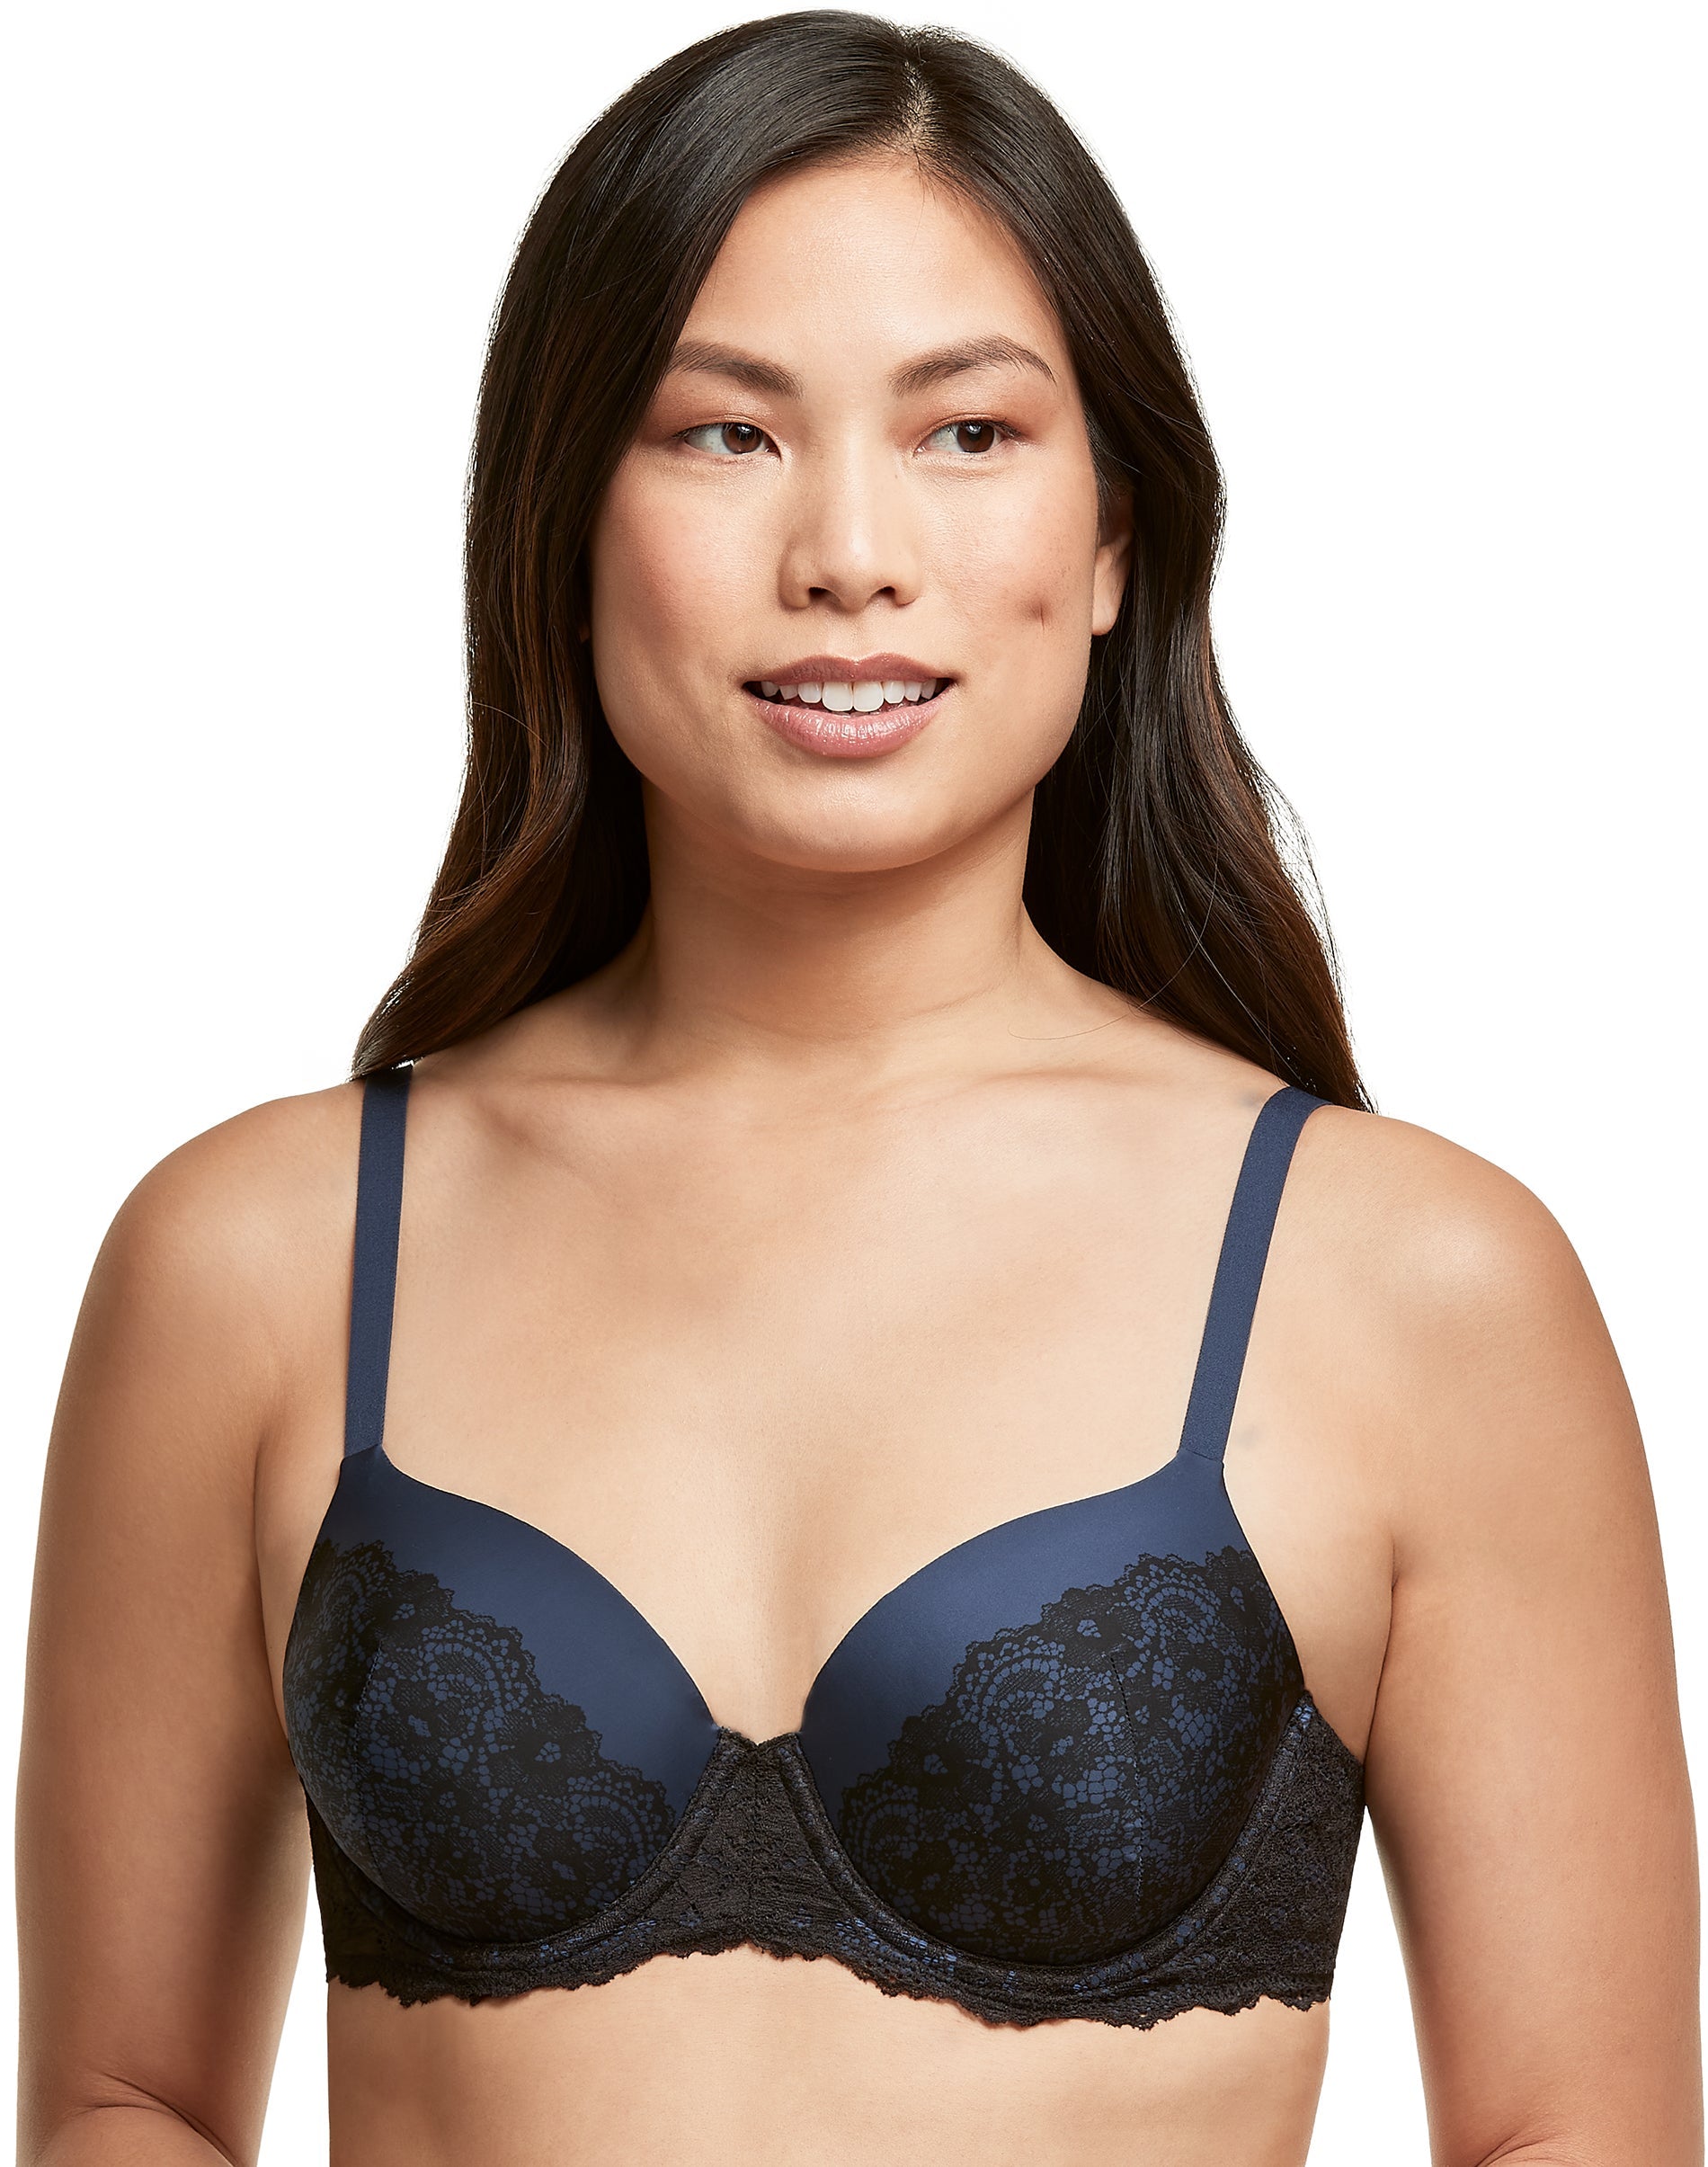 Maidenform One Fabulous Fit 2.0 Full Coverage Underwire Bra, 40D - QFC